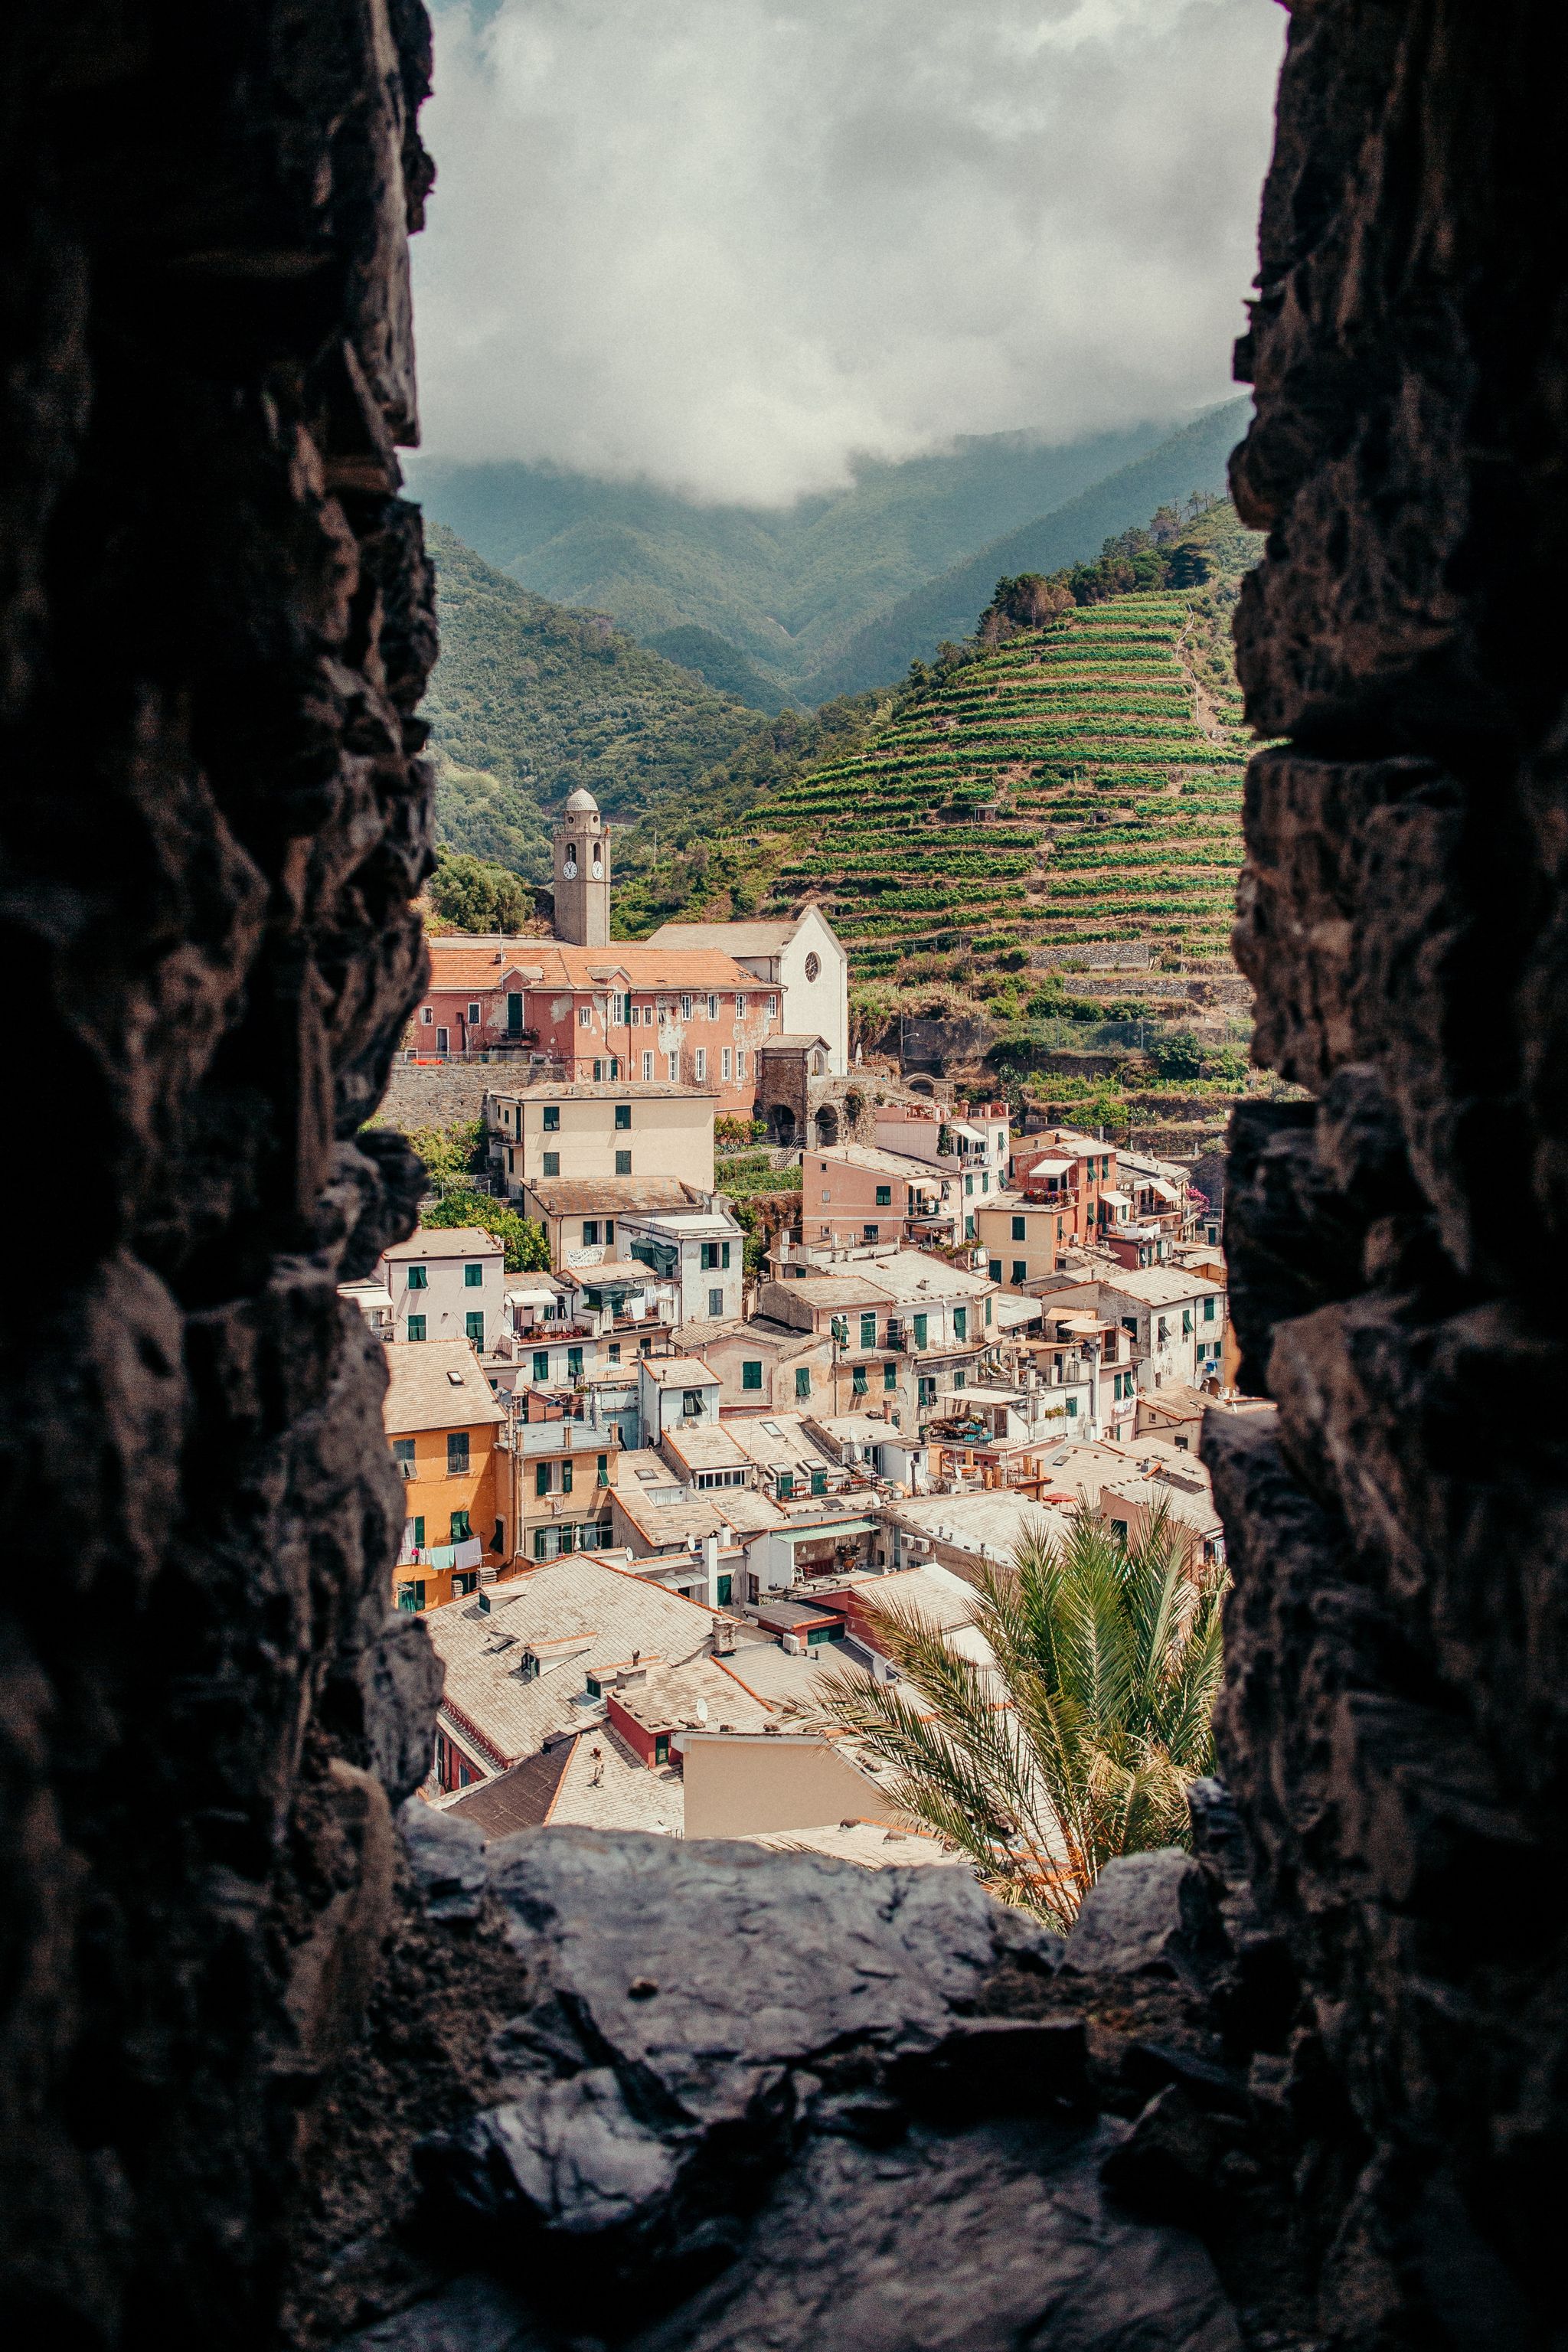 Sky, Town, Wall, Tree, Village, Tourism, Ruins, Building, Mountain, History, 